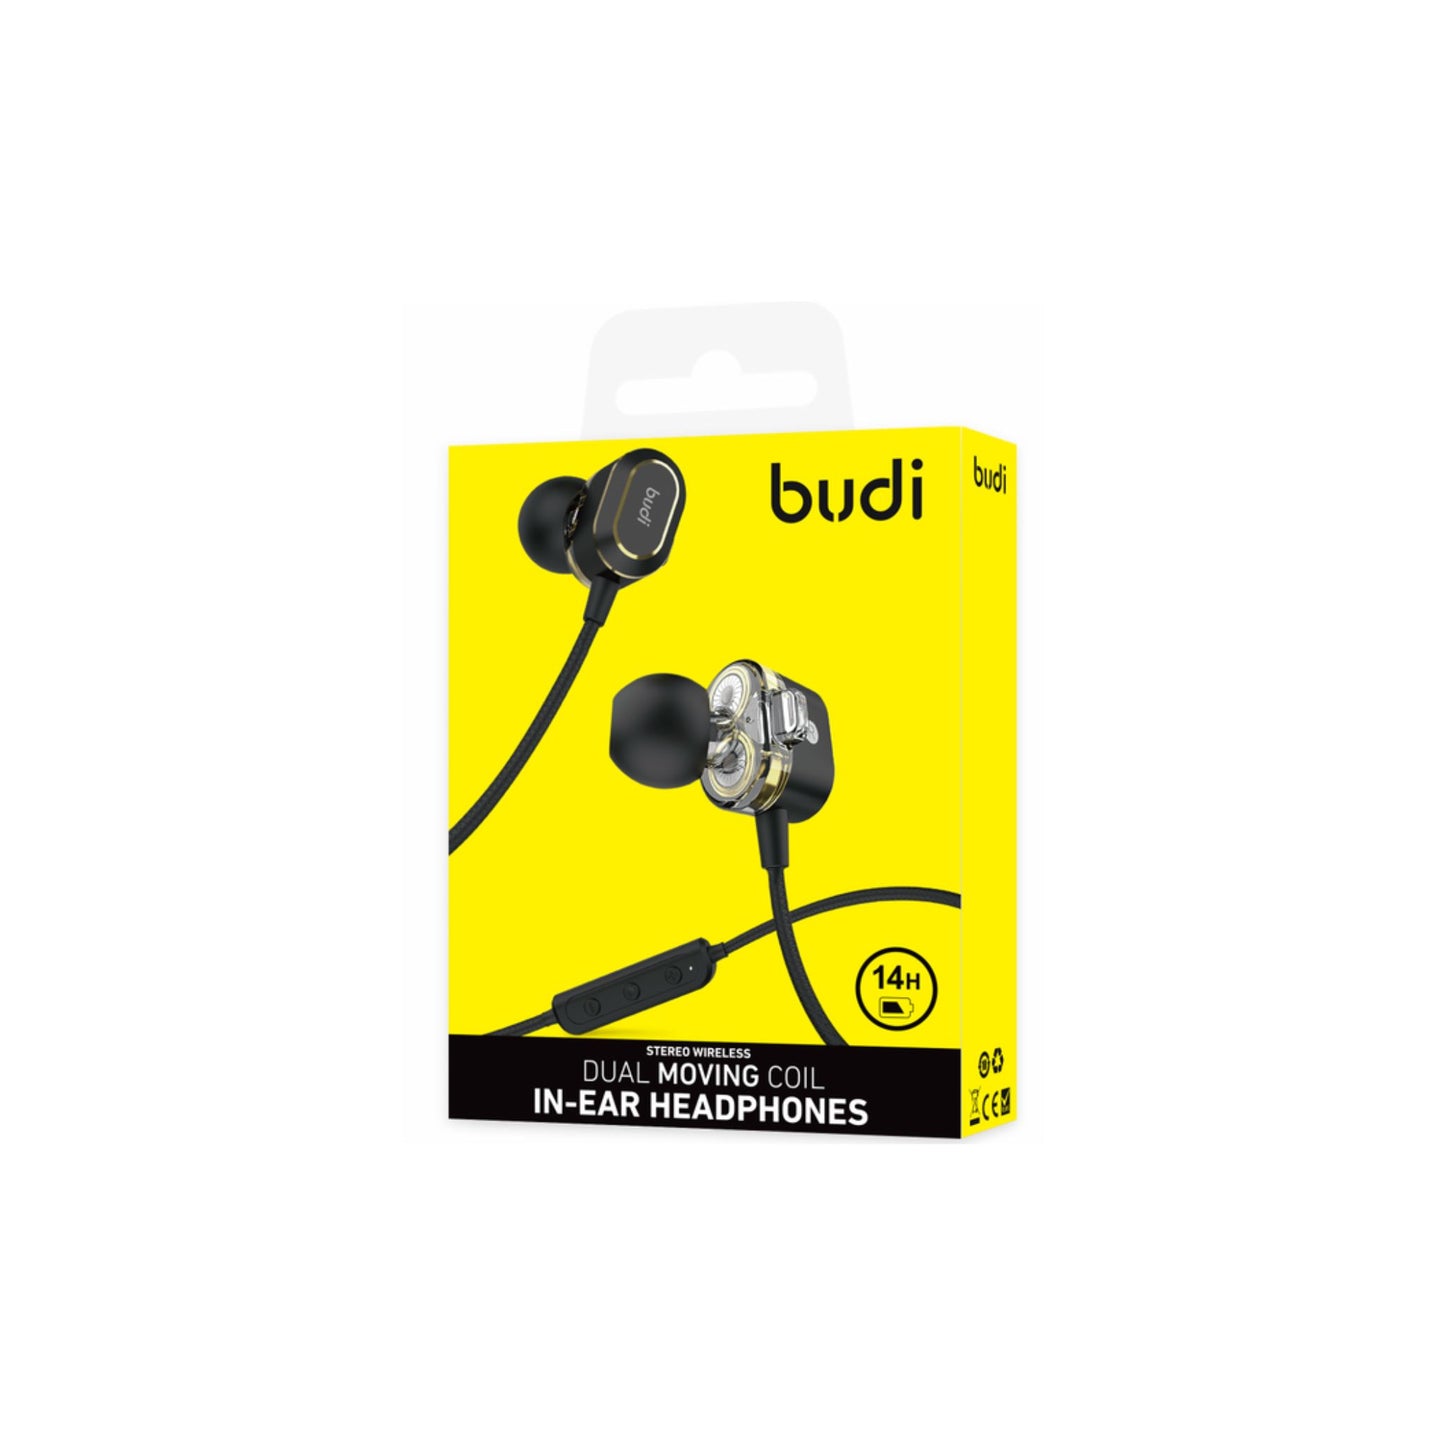 Budi Double moving COIL Bluetooth sports earphones